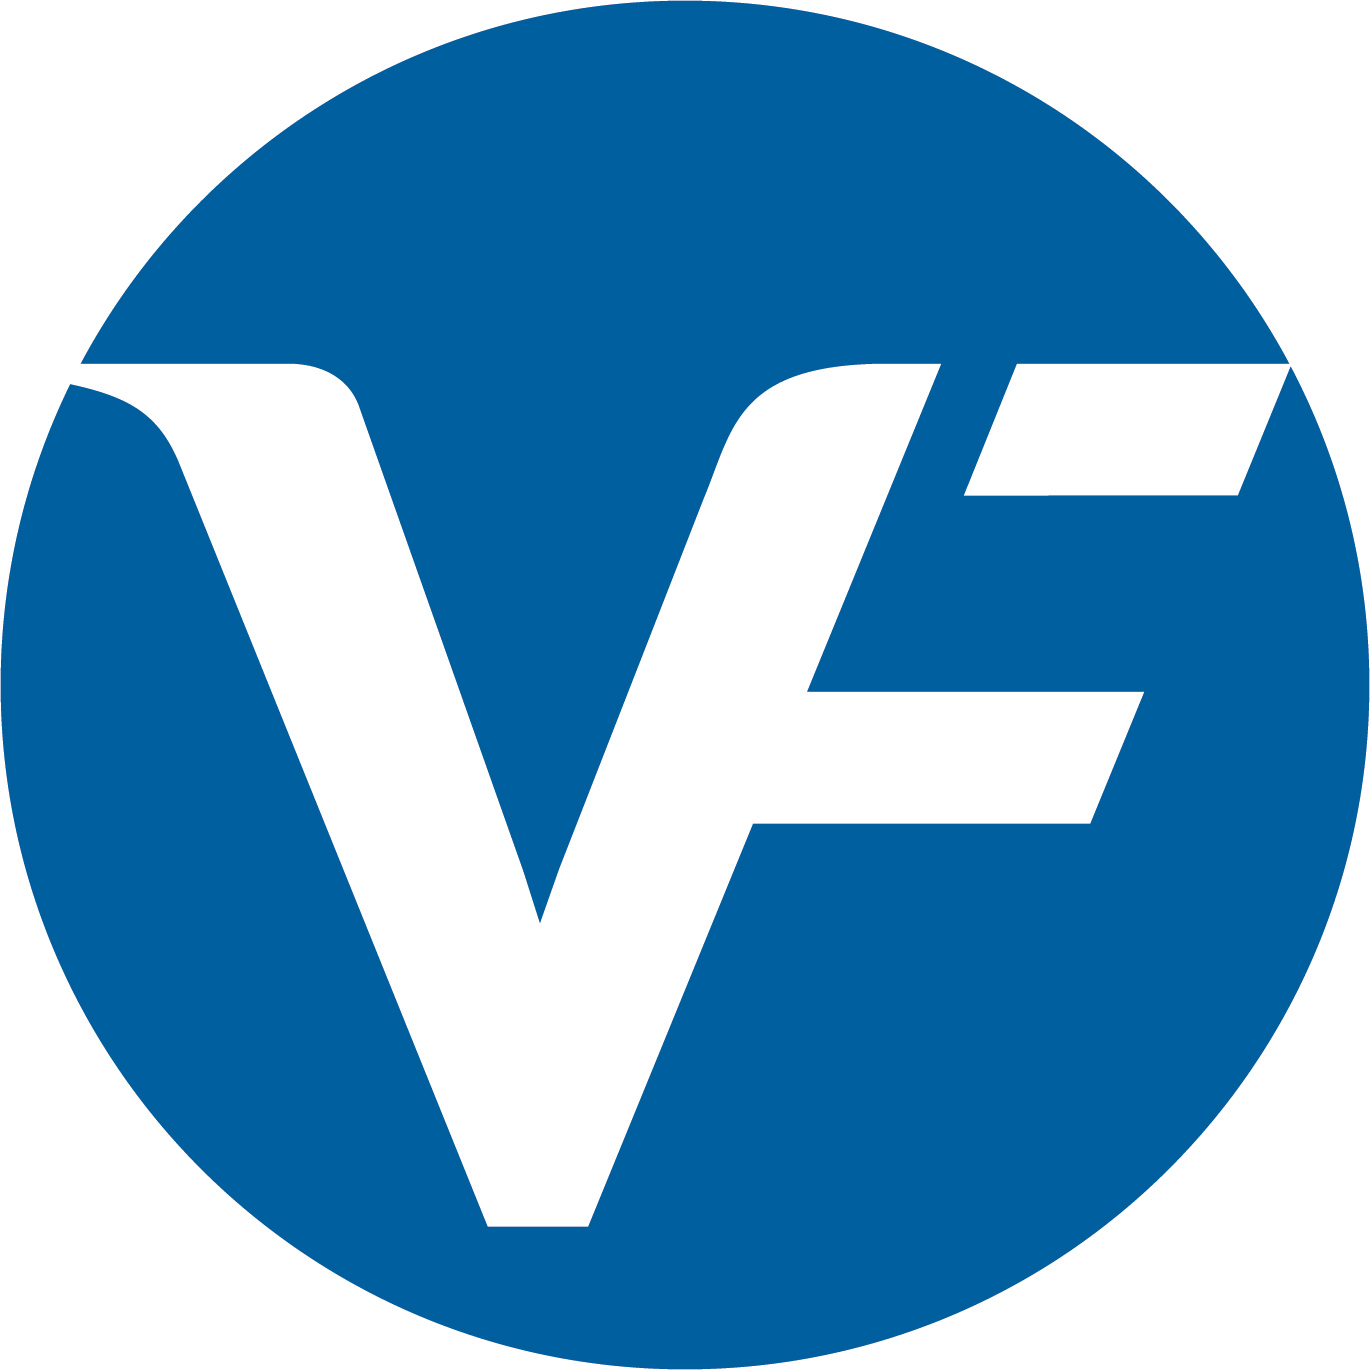 VF Corporation Announces New ScienceBased Targets to Accelerate Social